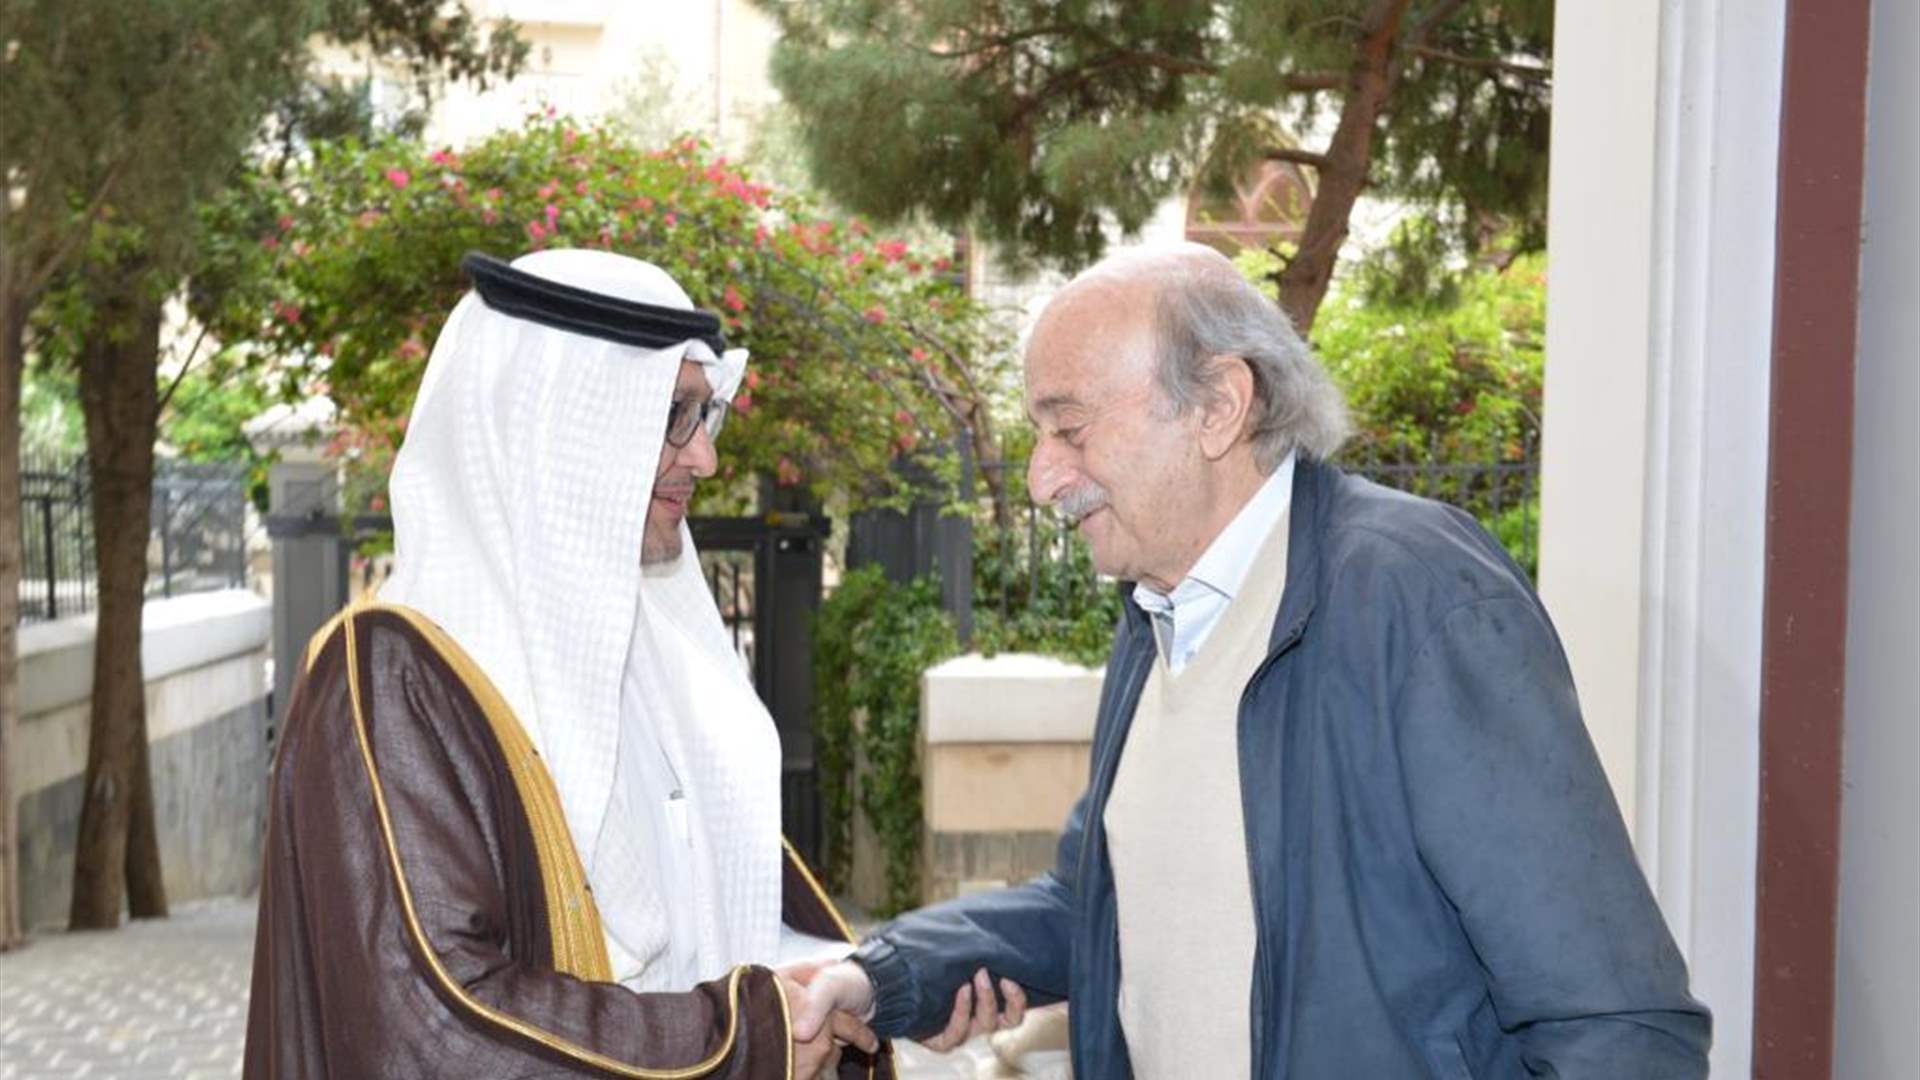 Bukhari after meeting Jumblatt: Sustainable solutions come from within Lebanon, not from outside